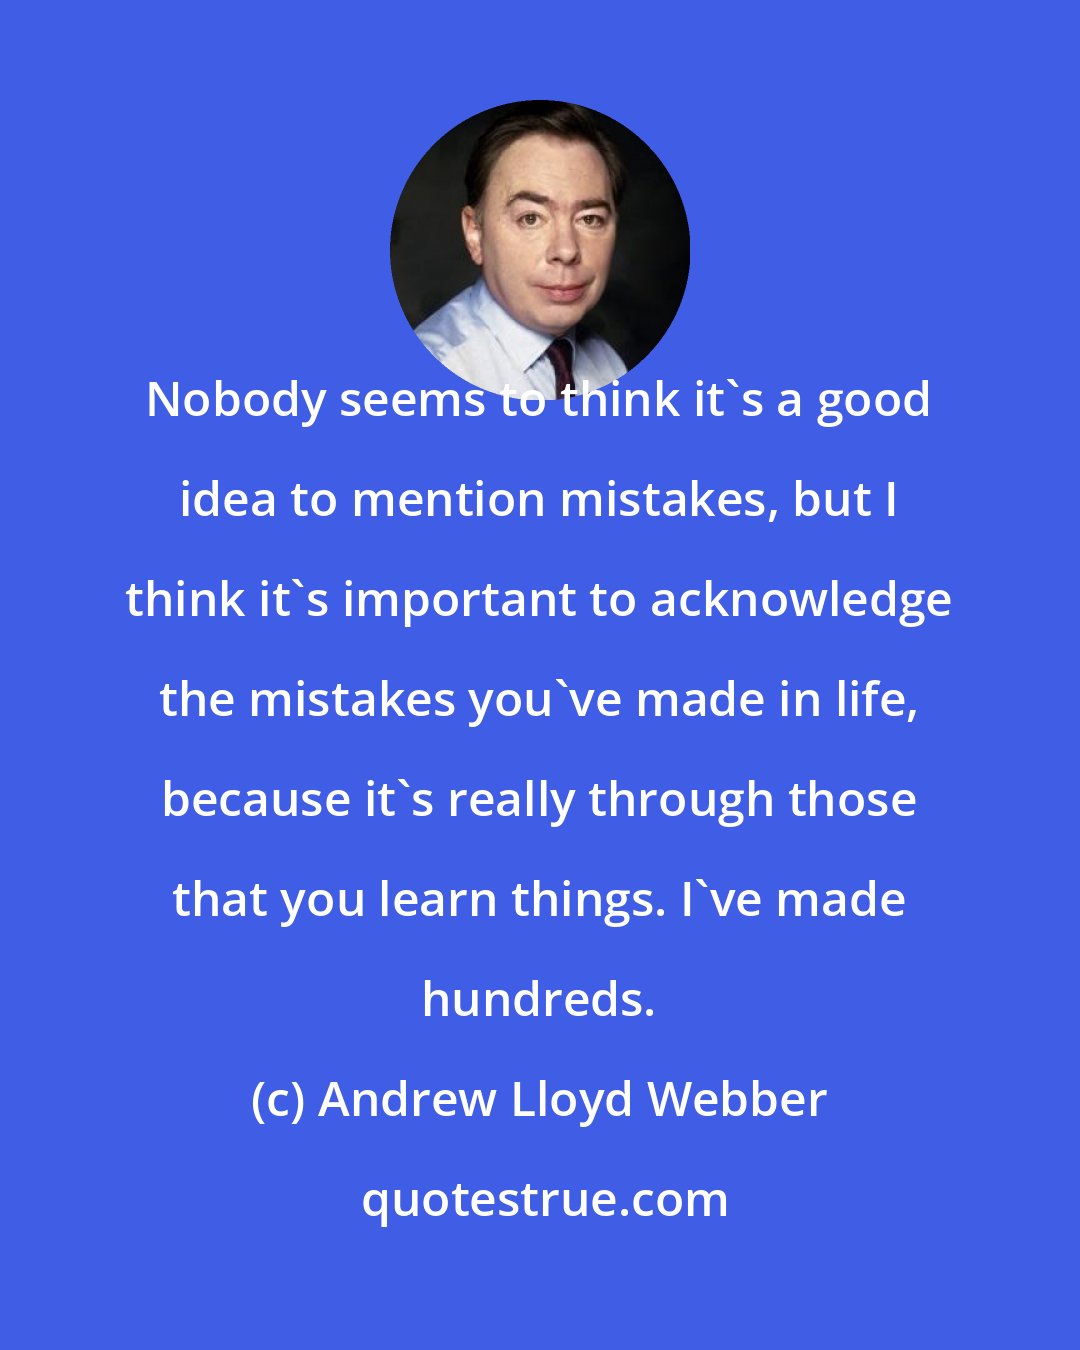 Andrew Lloyd Webber: Nobody seems to think it's a good idea to mention mistakes, but I think it's important to acknowledge the mistakes you've made in life, because it's really through those that you learn things. I've made hundreds.